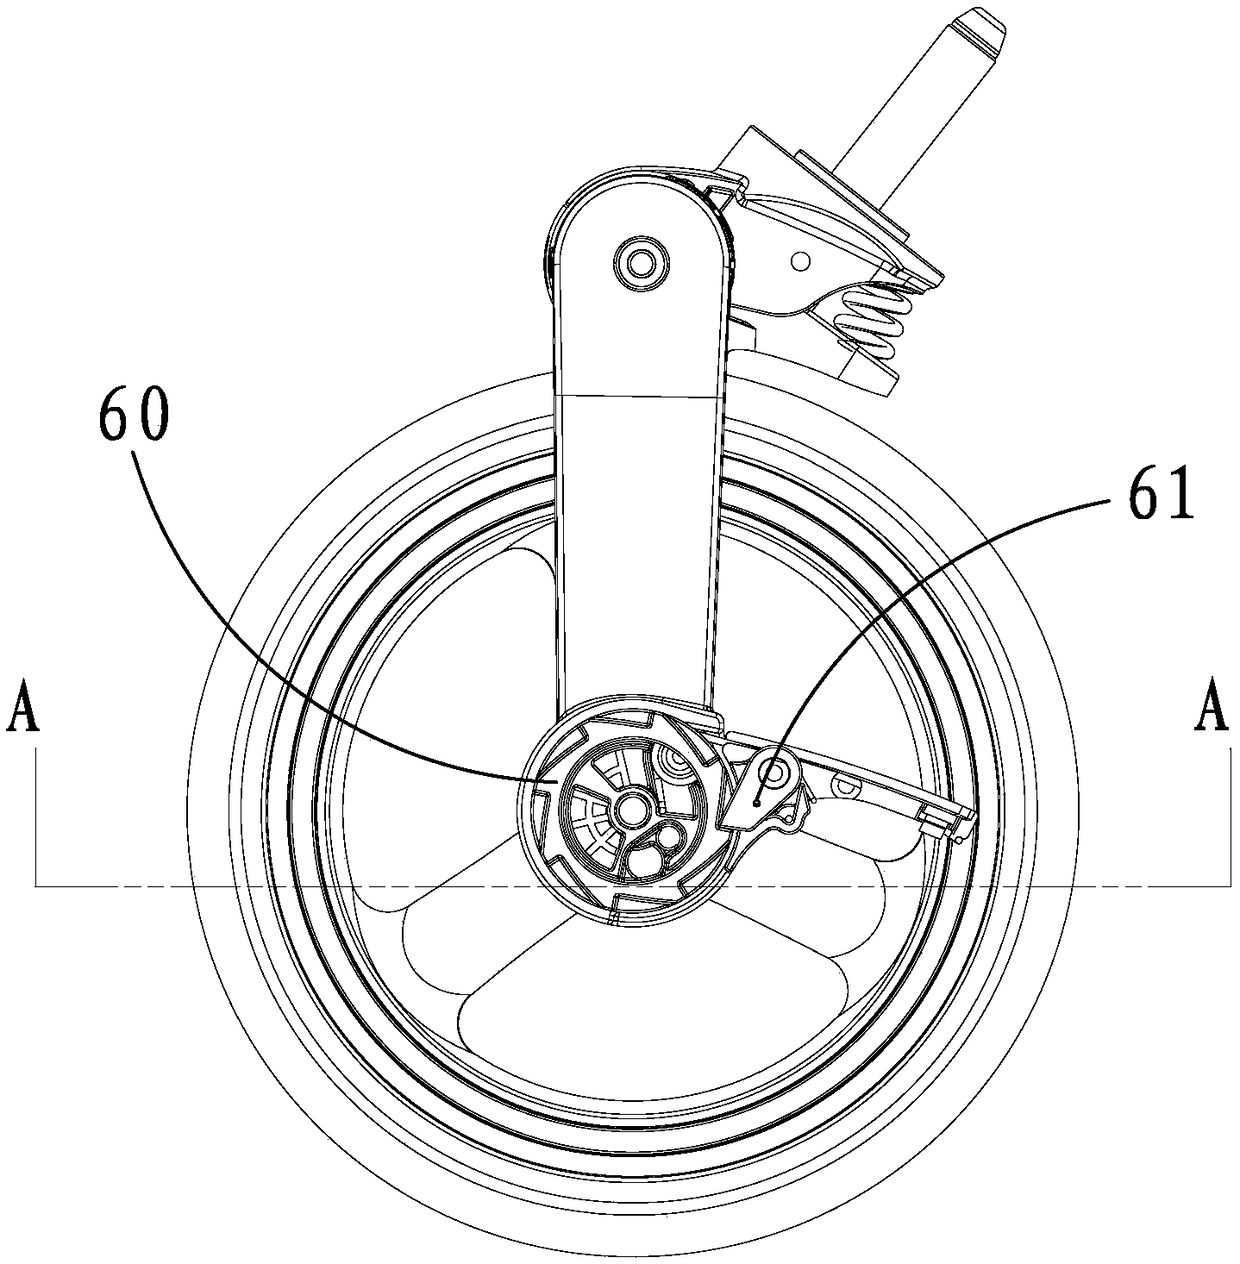 Brake mechanism capable of being automatically reset